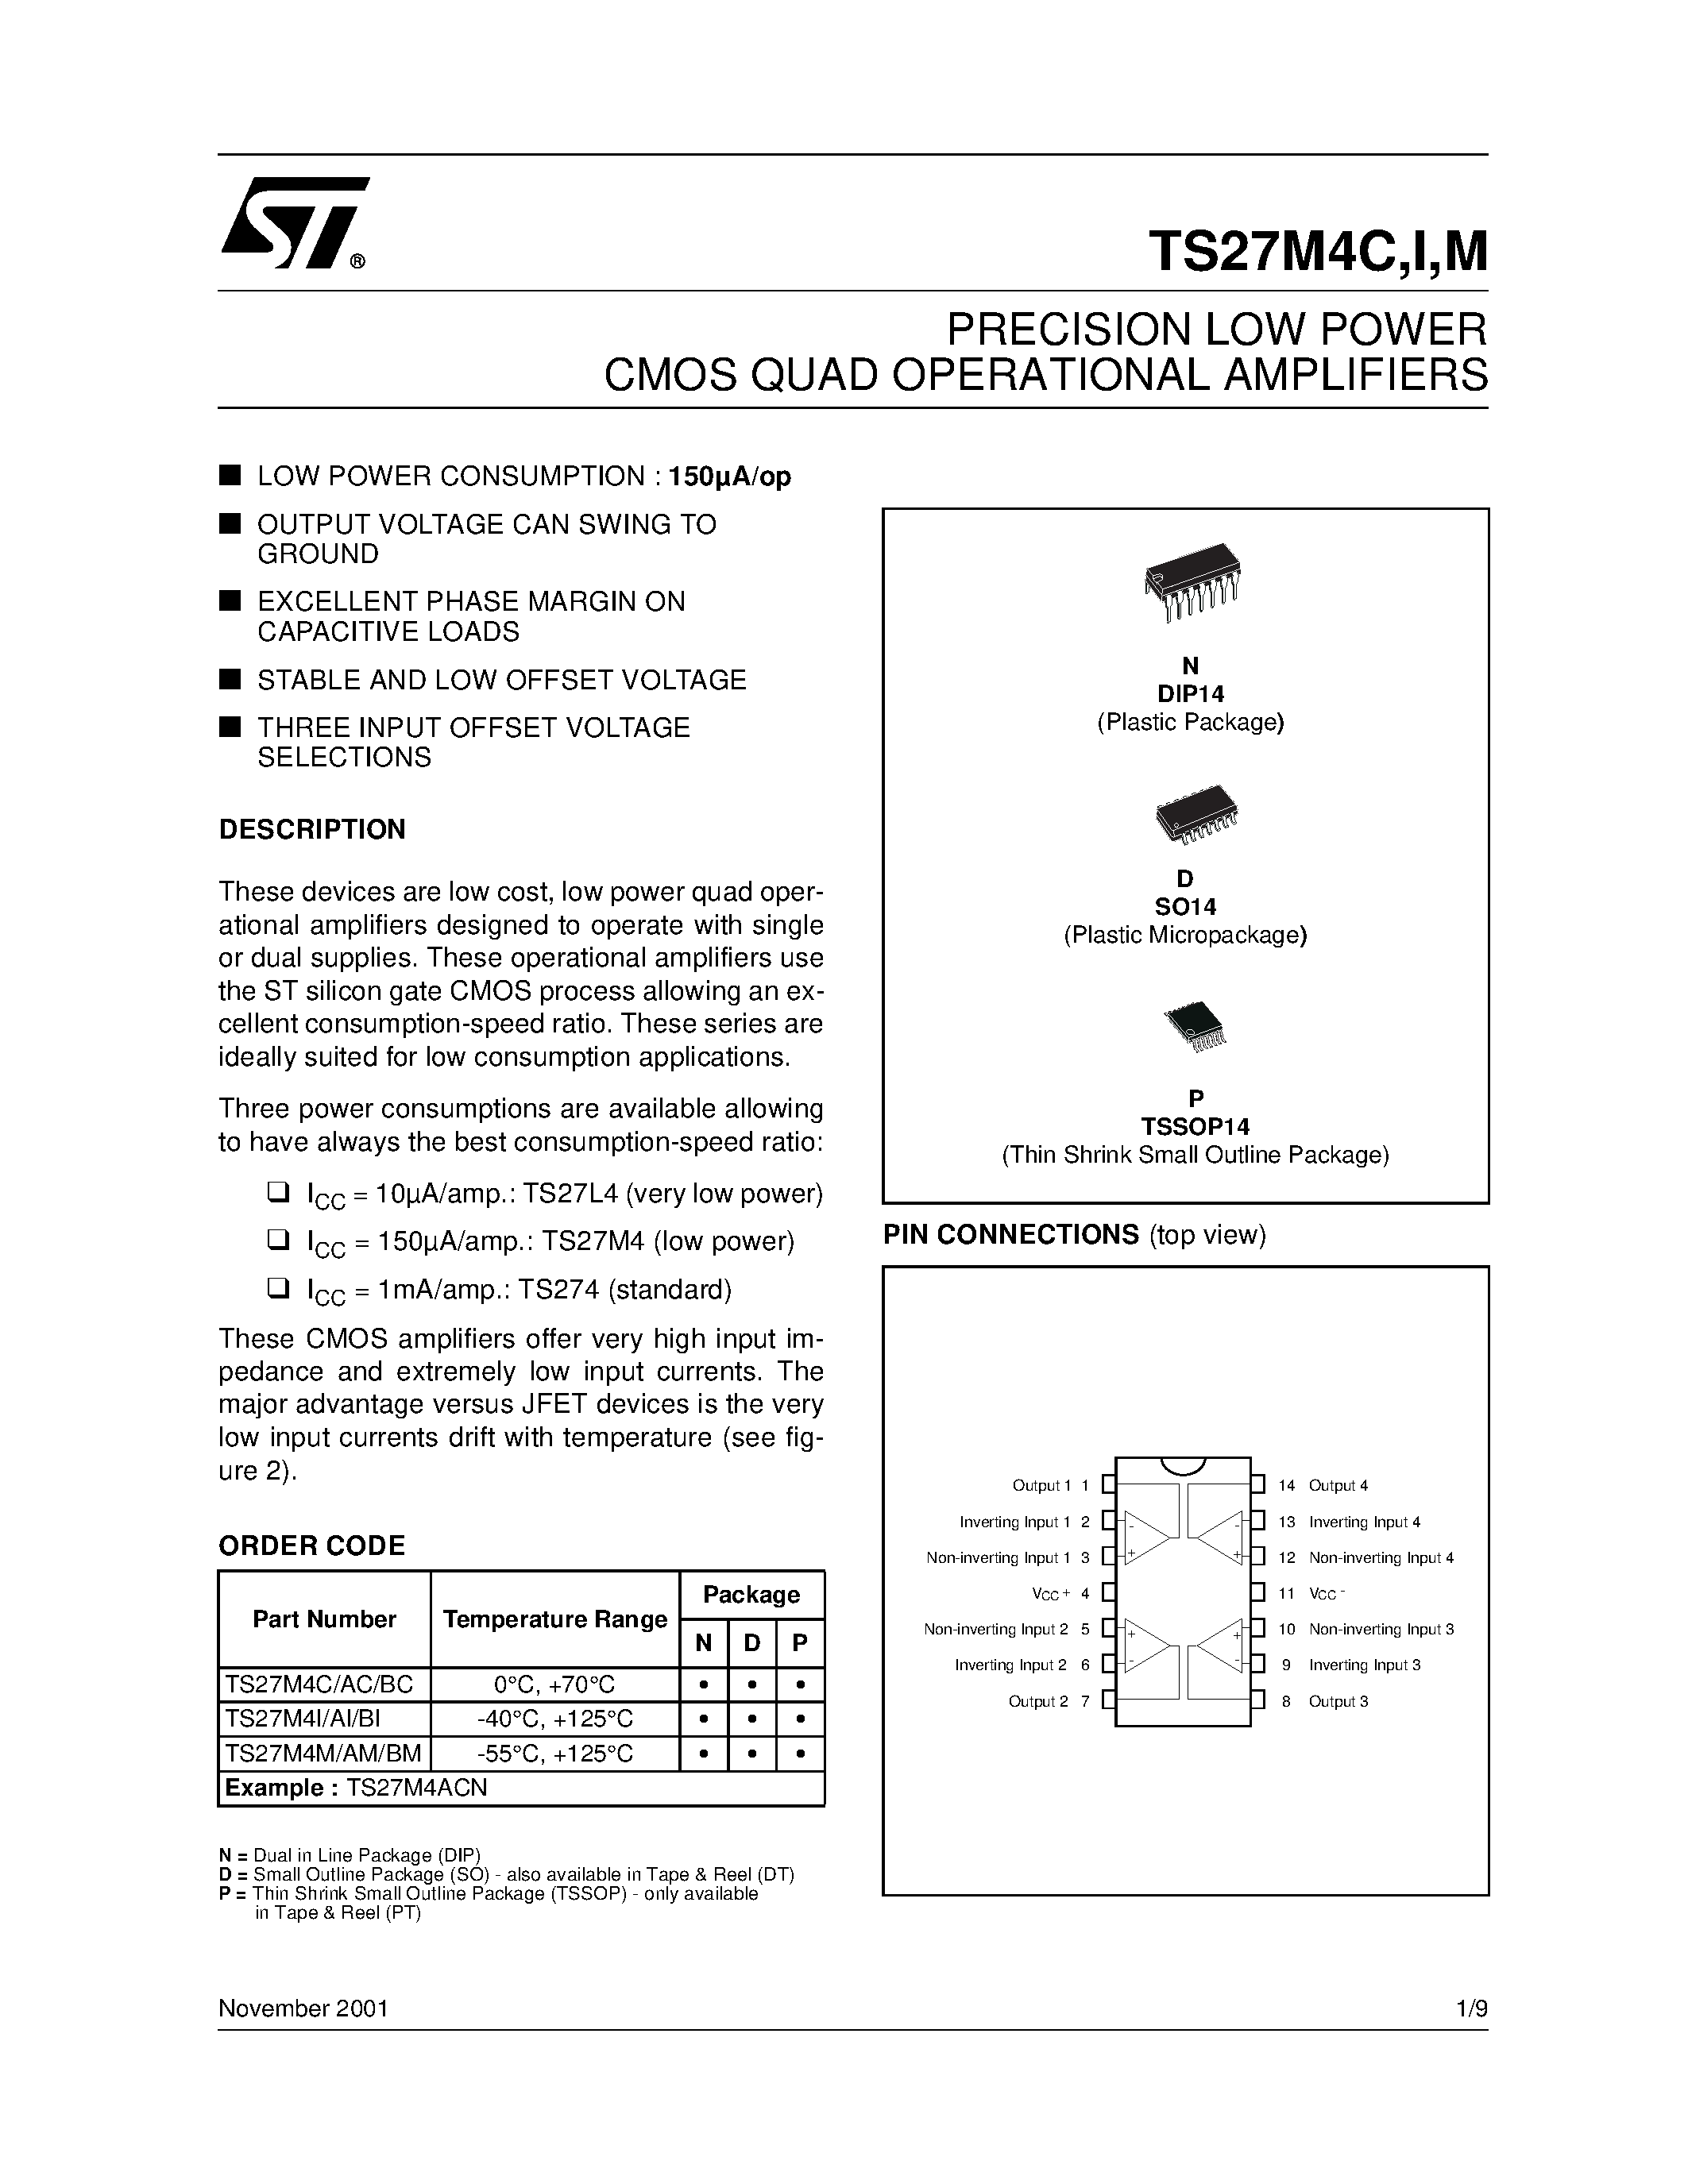 Datasheet TS27M4I - PRECISION LOW POWER CMOS QUAD OPERATIONAL AMPLIFIERS page 1